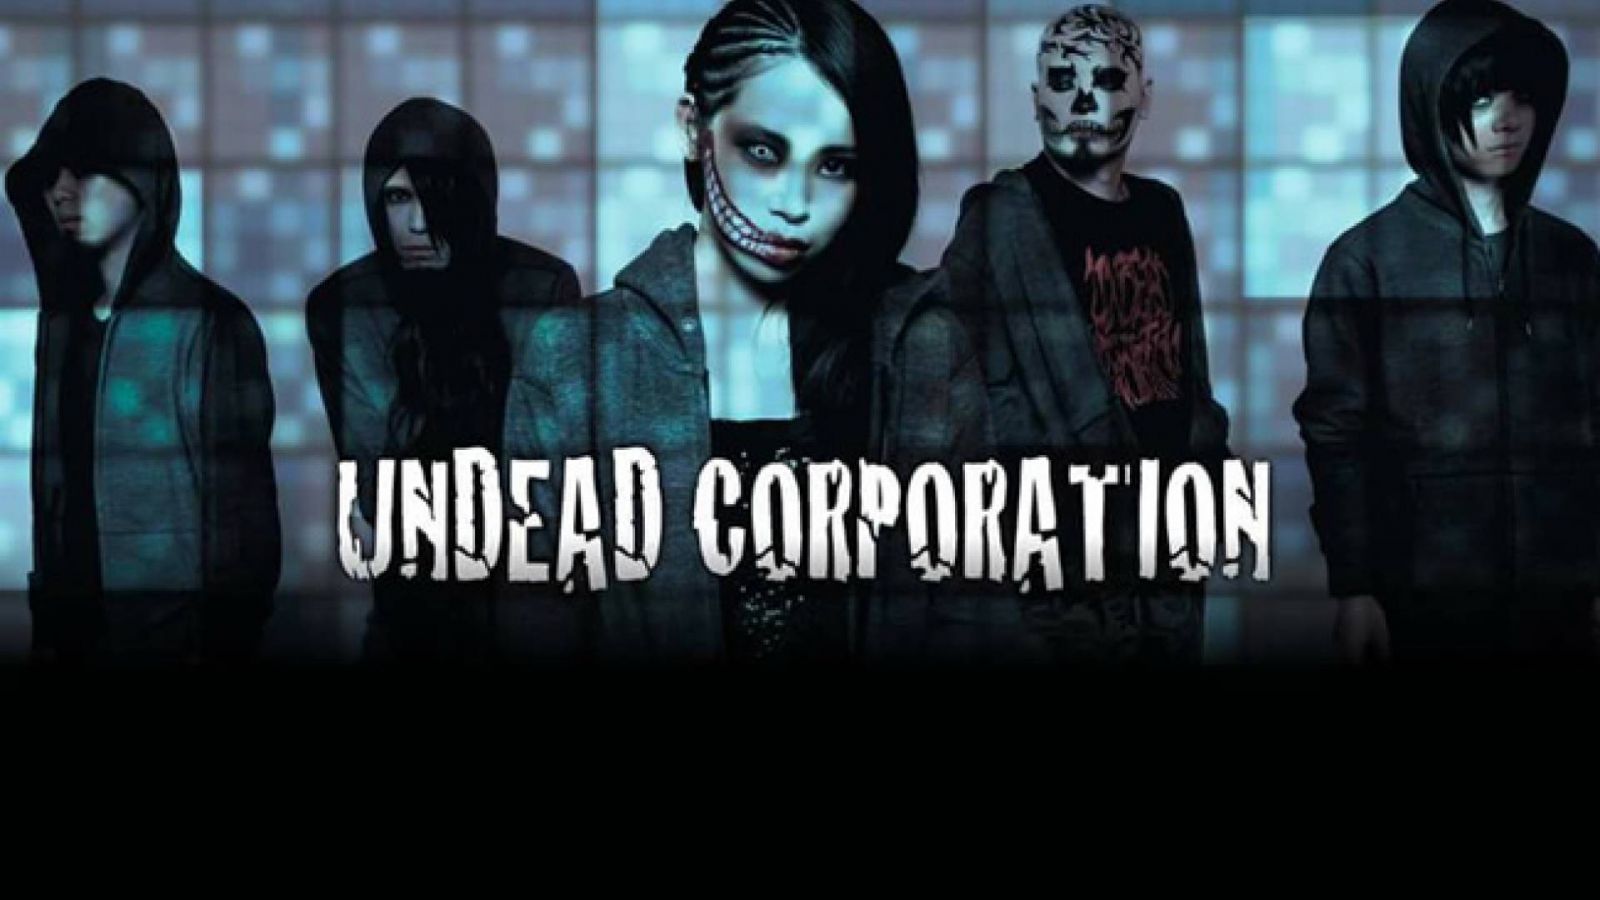 Entrevista com o UNDEAD CORPORATION © 2015 UNDEAD CORPORATION. All rights reserved.